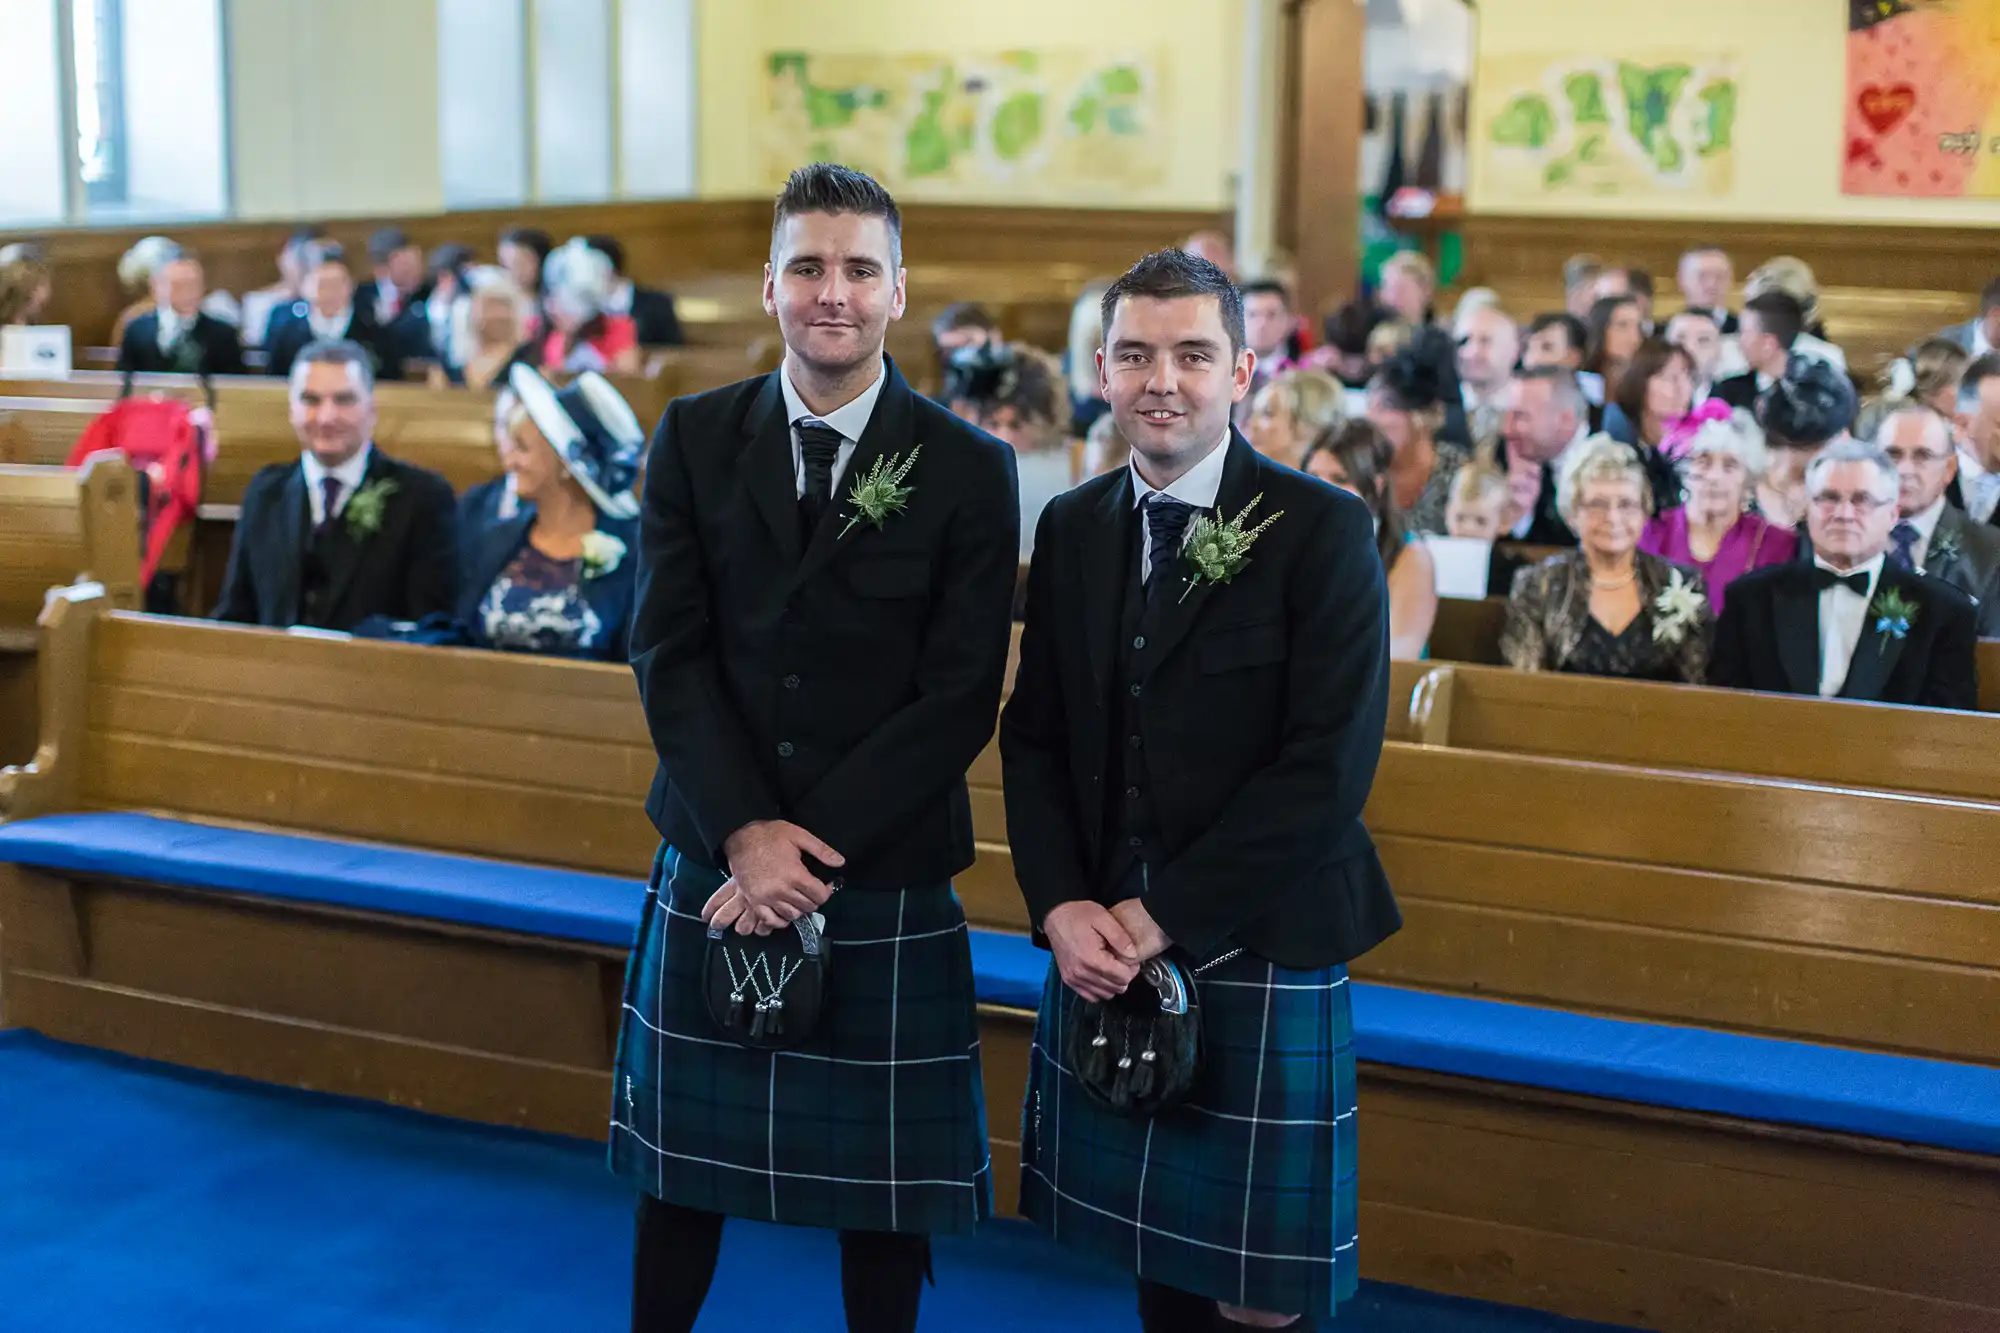 Two men in traditional kilts and jackets standing in a church aisle, with wedding guests seated in the background.